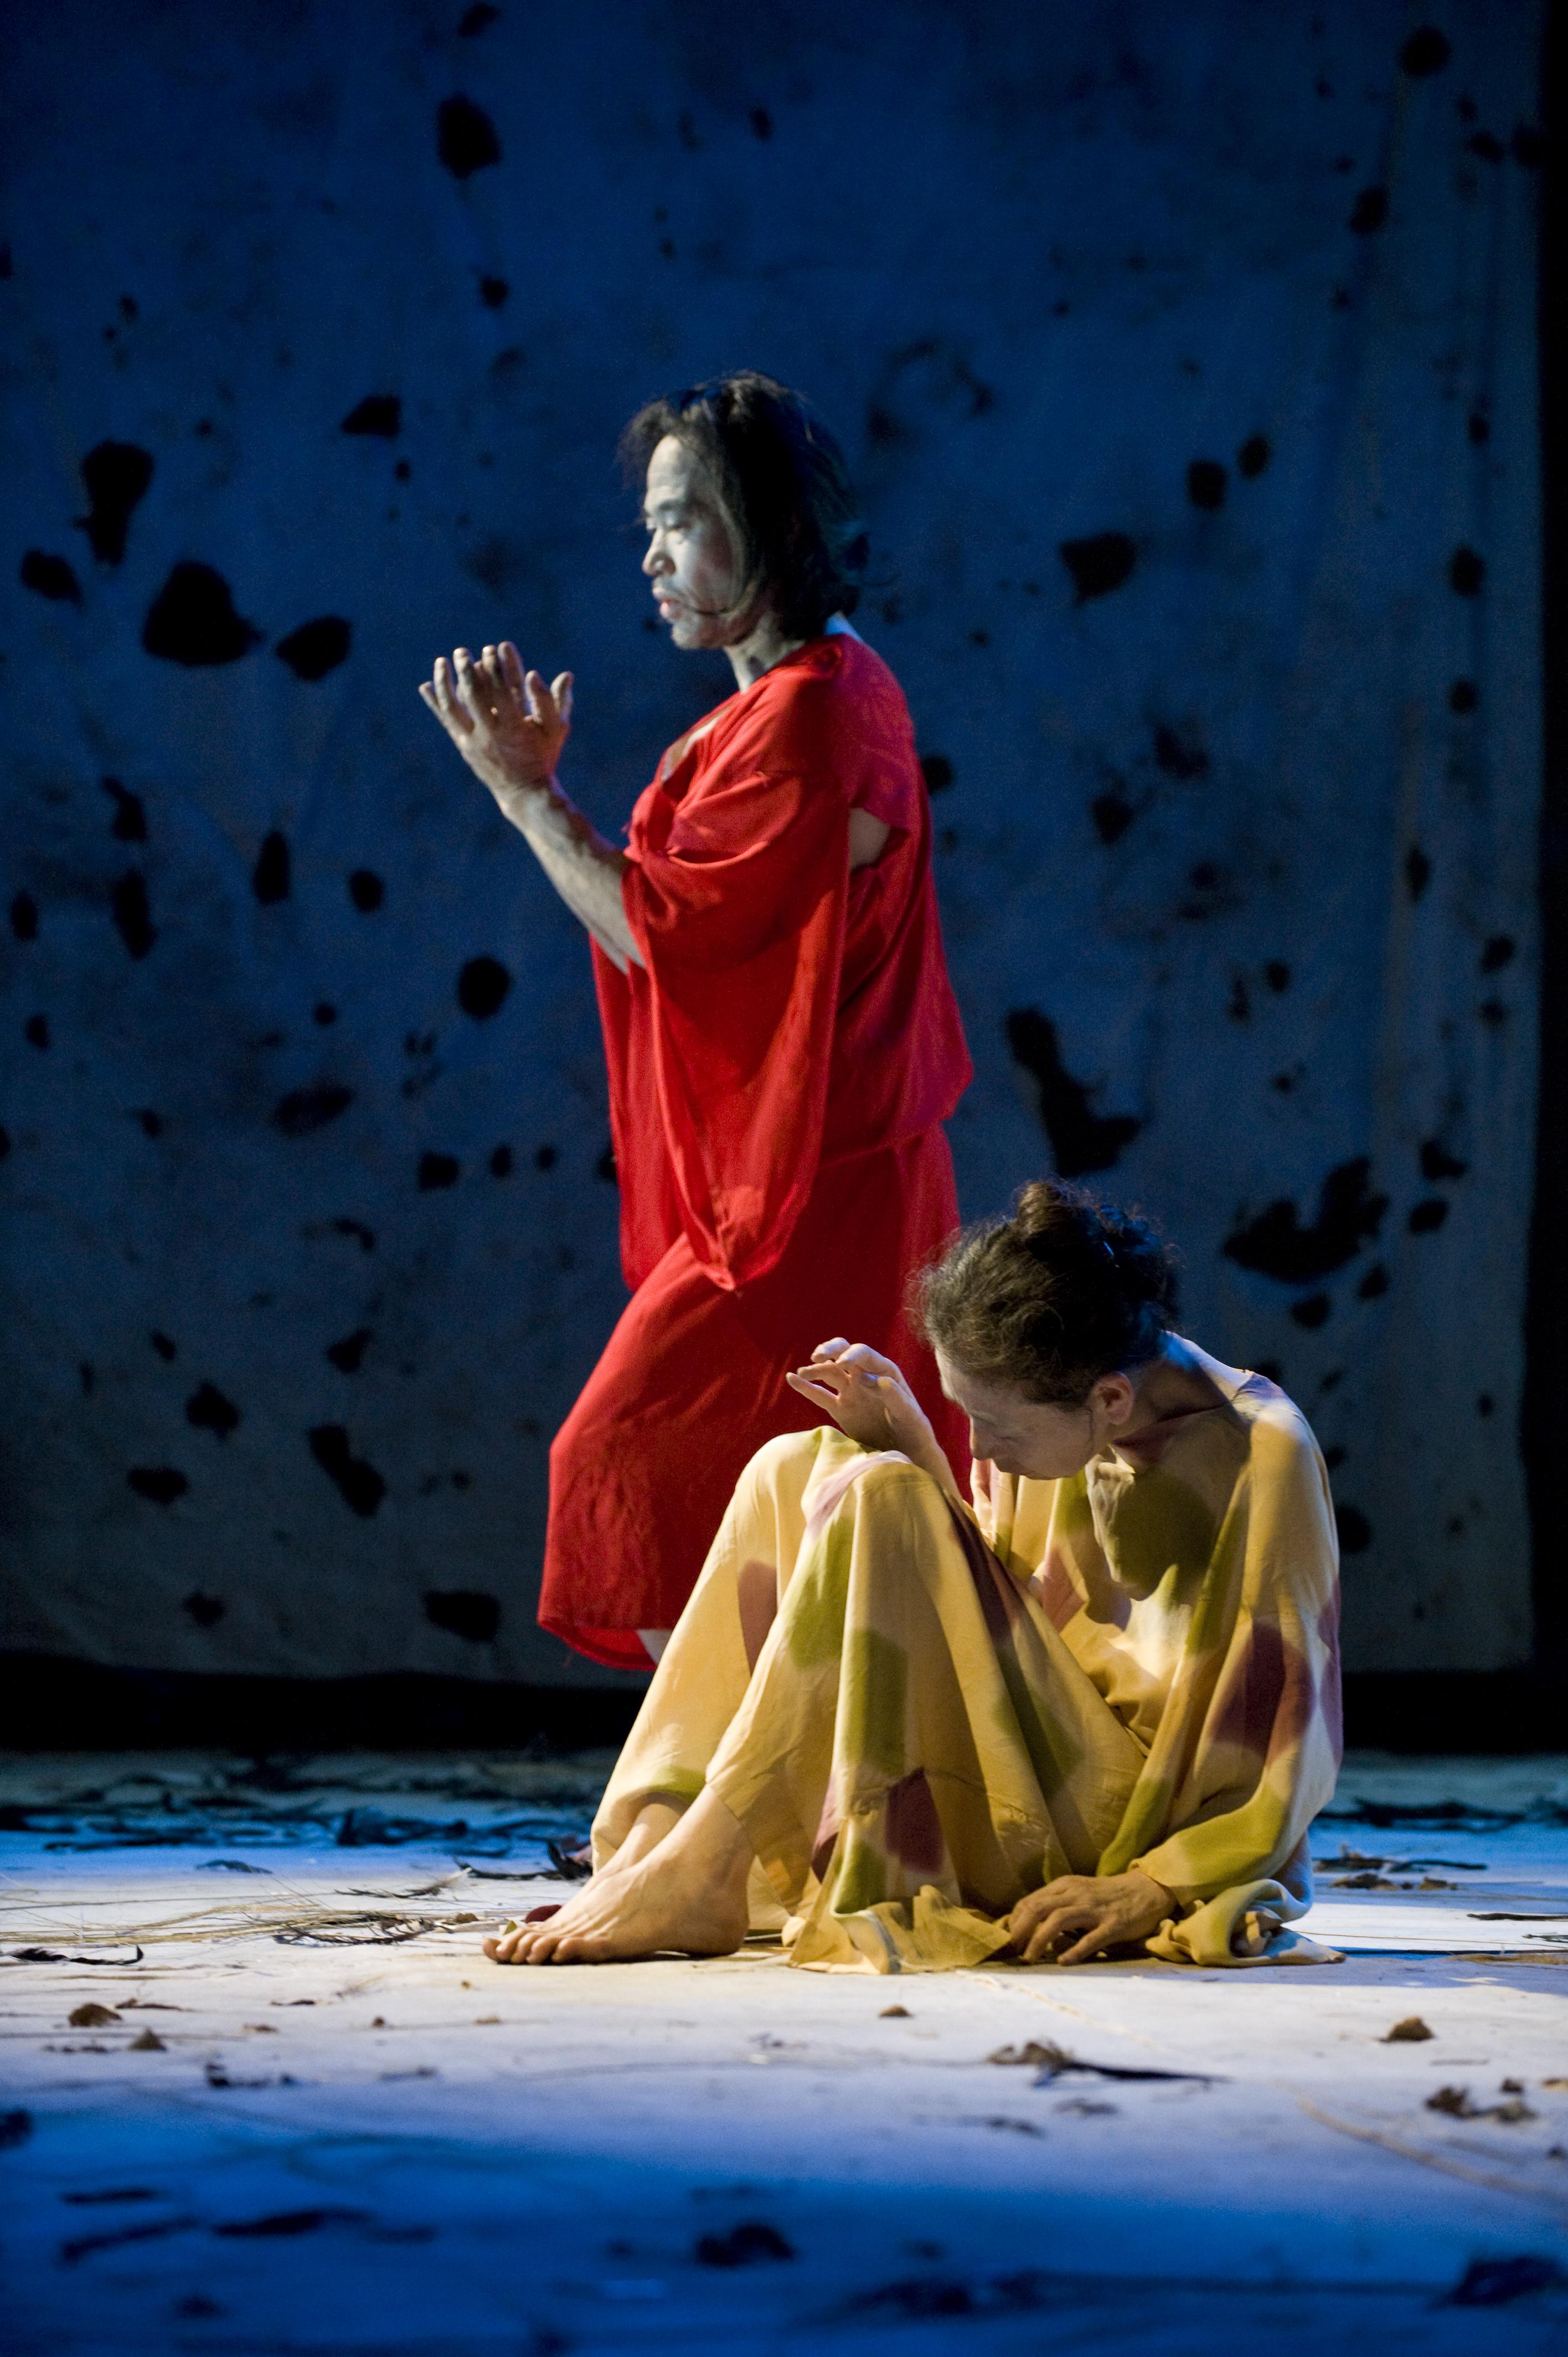 A figure clad in a loose red robe stands behind a seated figure in a loose yellow robe. The stage and backdrop behind them are blue, spotted randomly with dark stains.